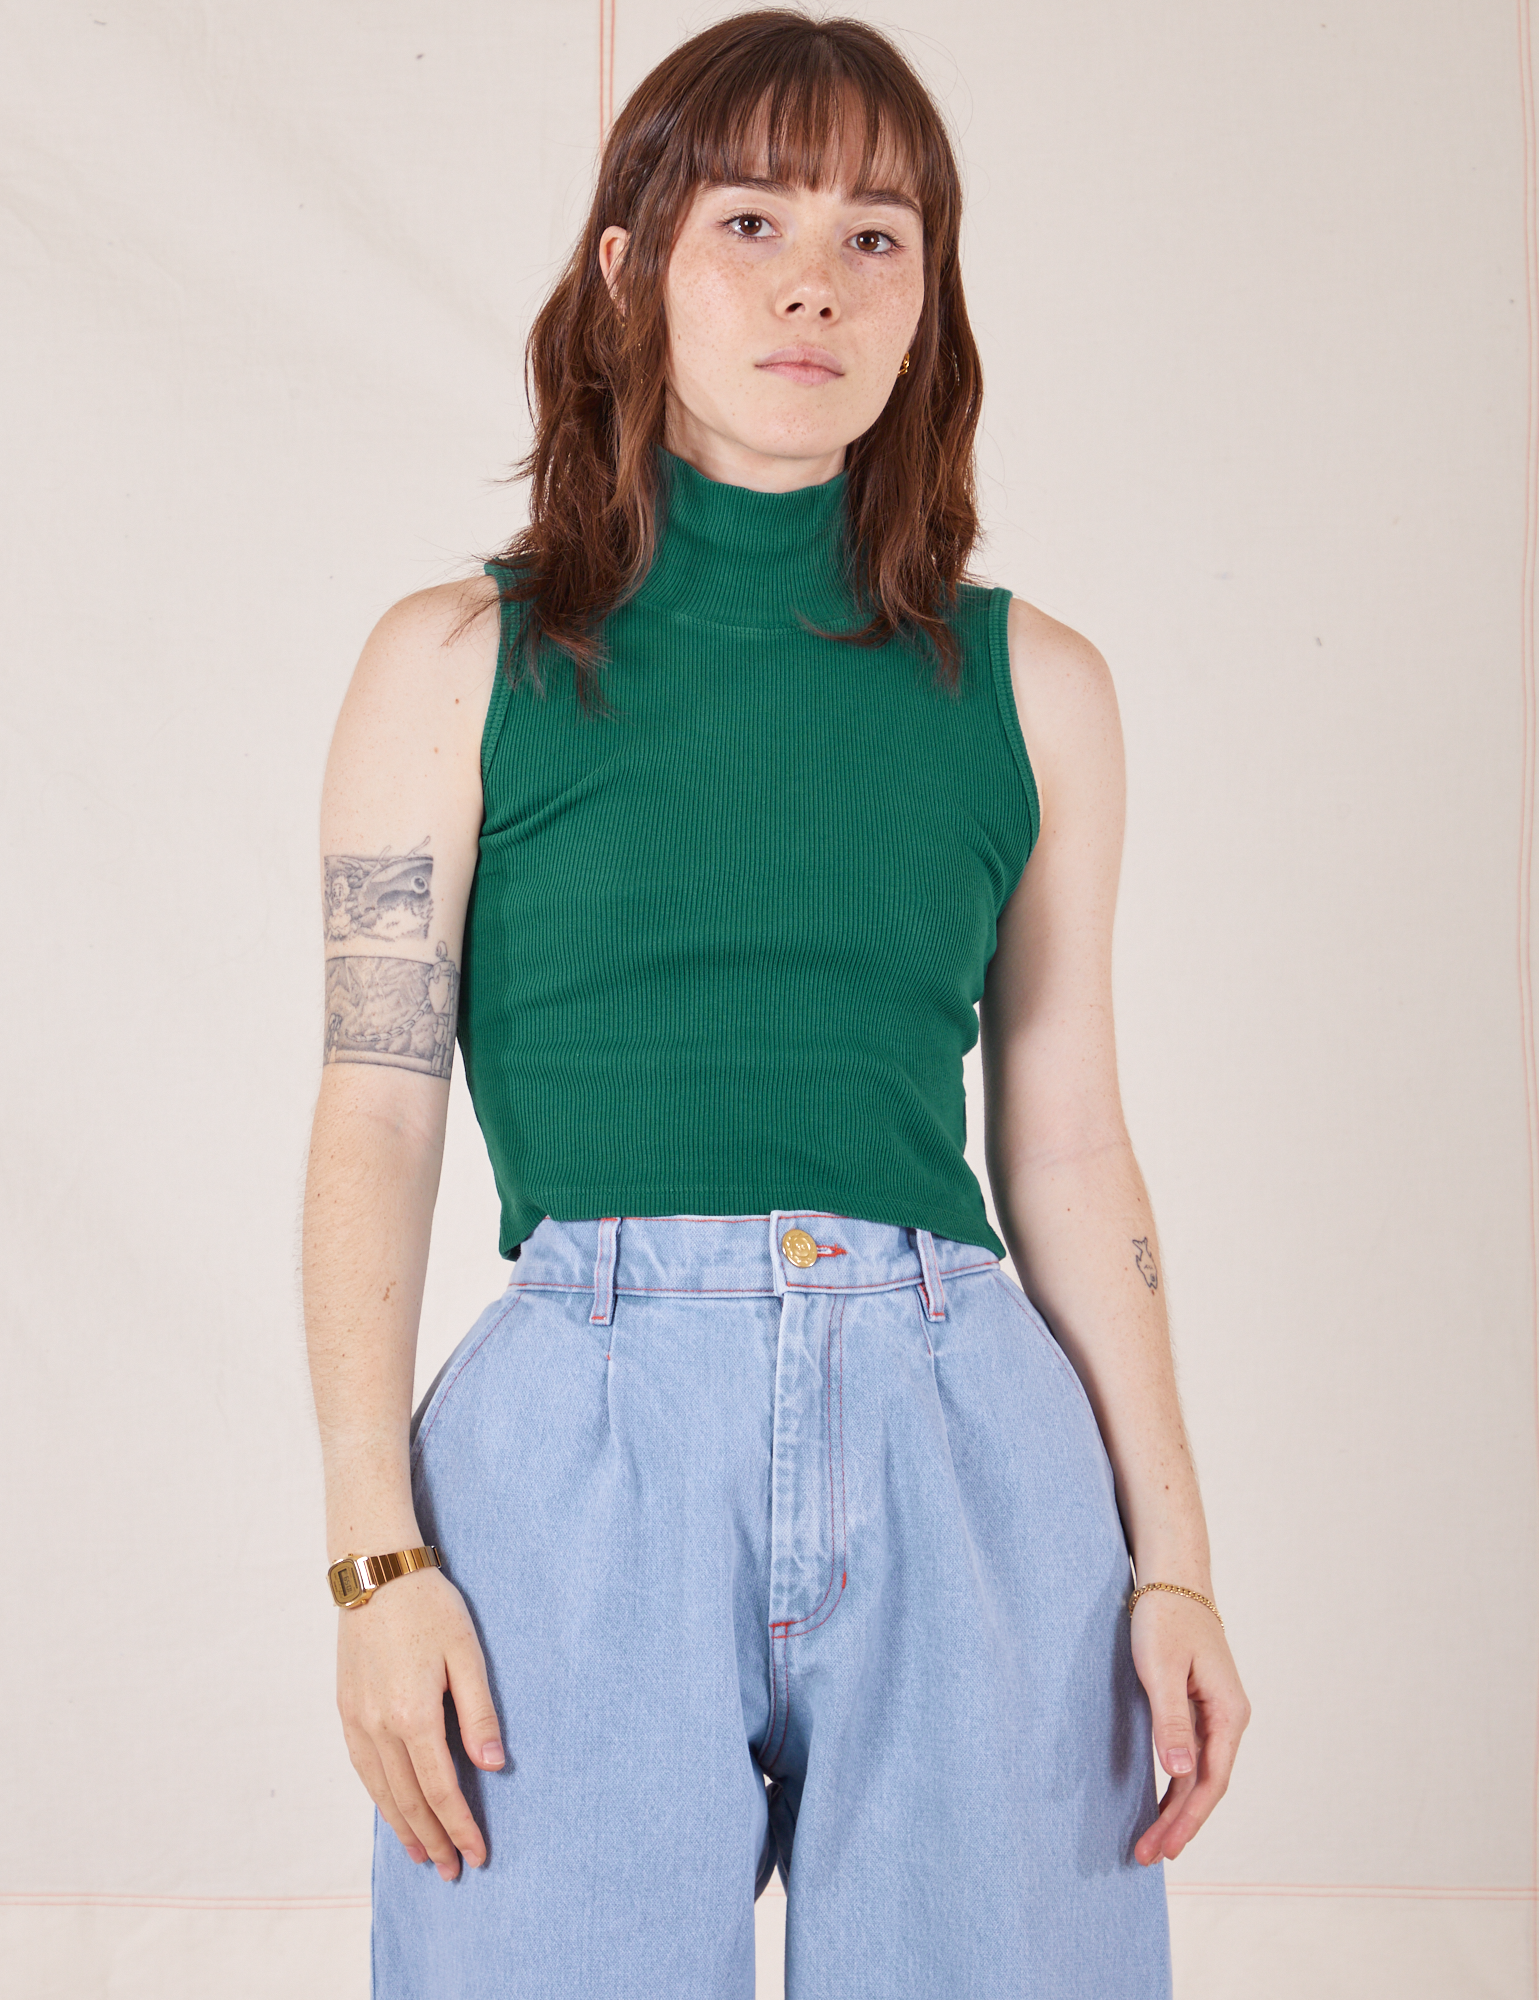 Hana is 5&#39;3&quot; and wearing P Sleeveless Essential Turtleneck in Hunter Green